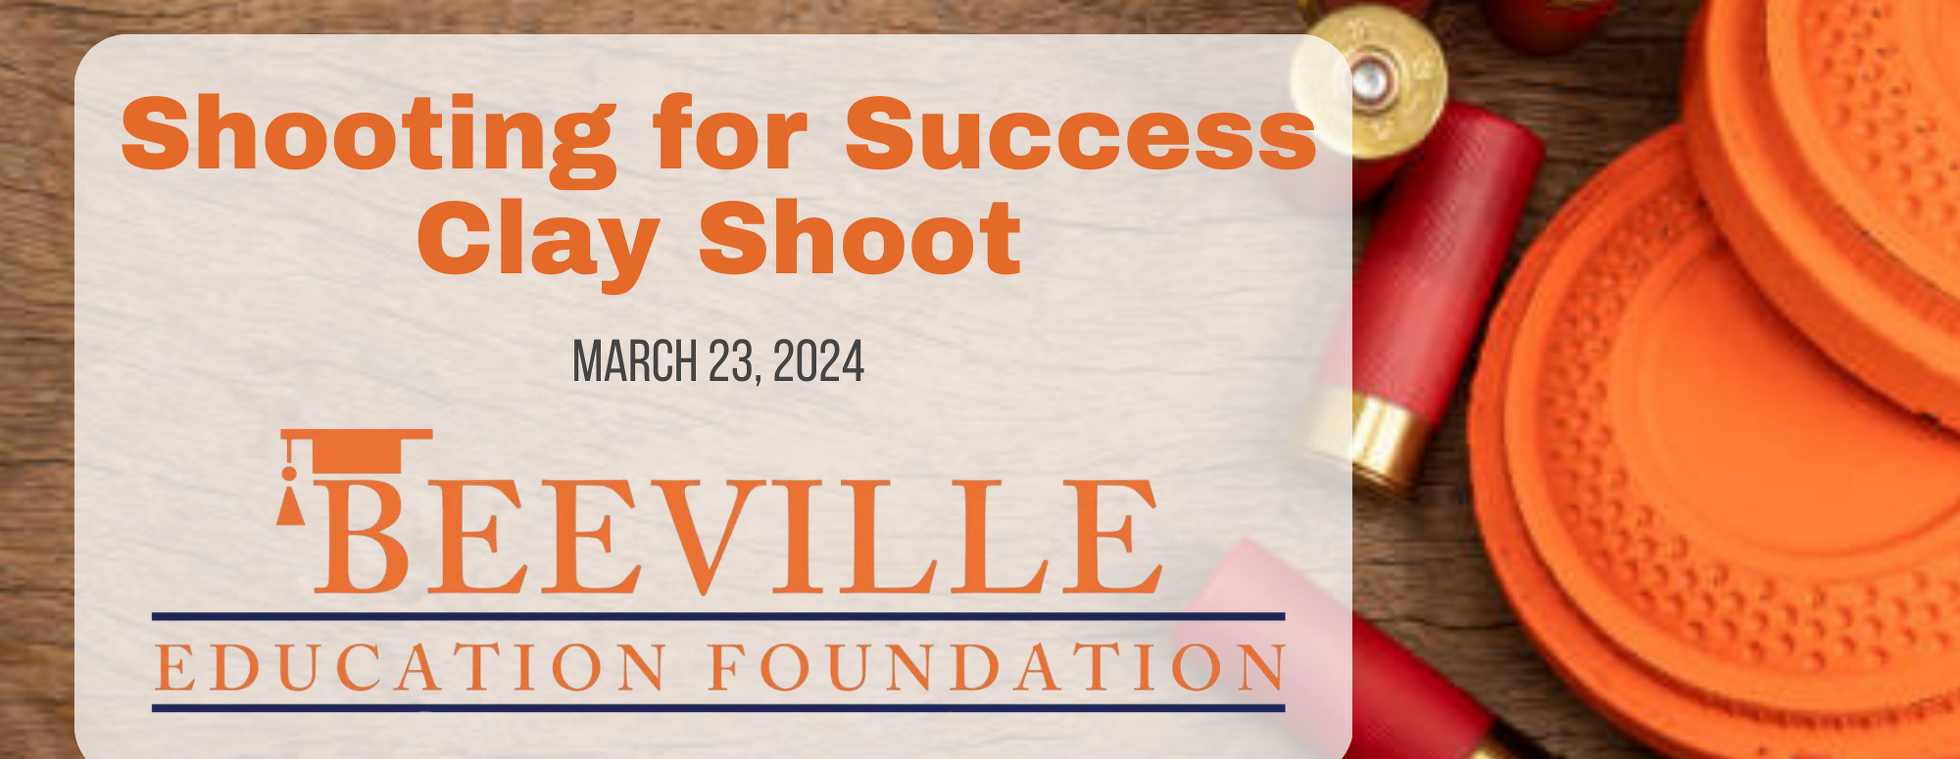 Beeville Education Foundation Shooting for Success Clay Shoot